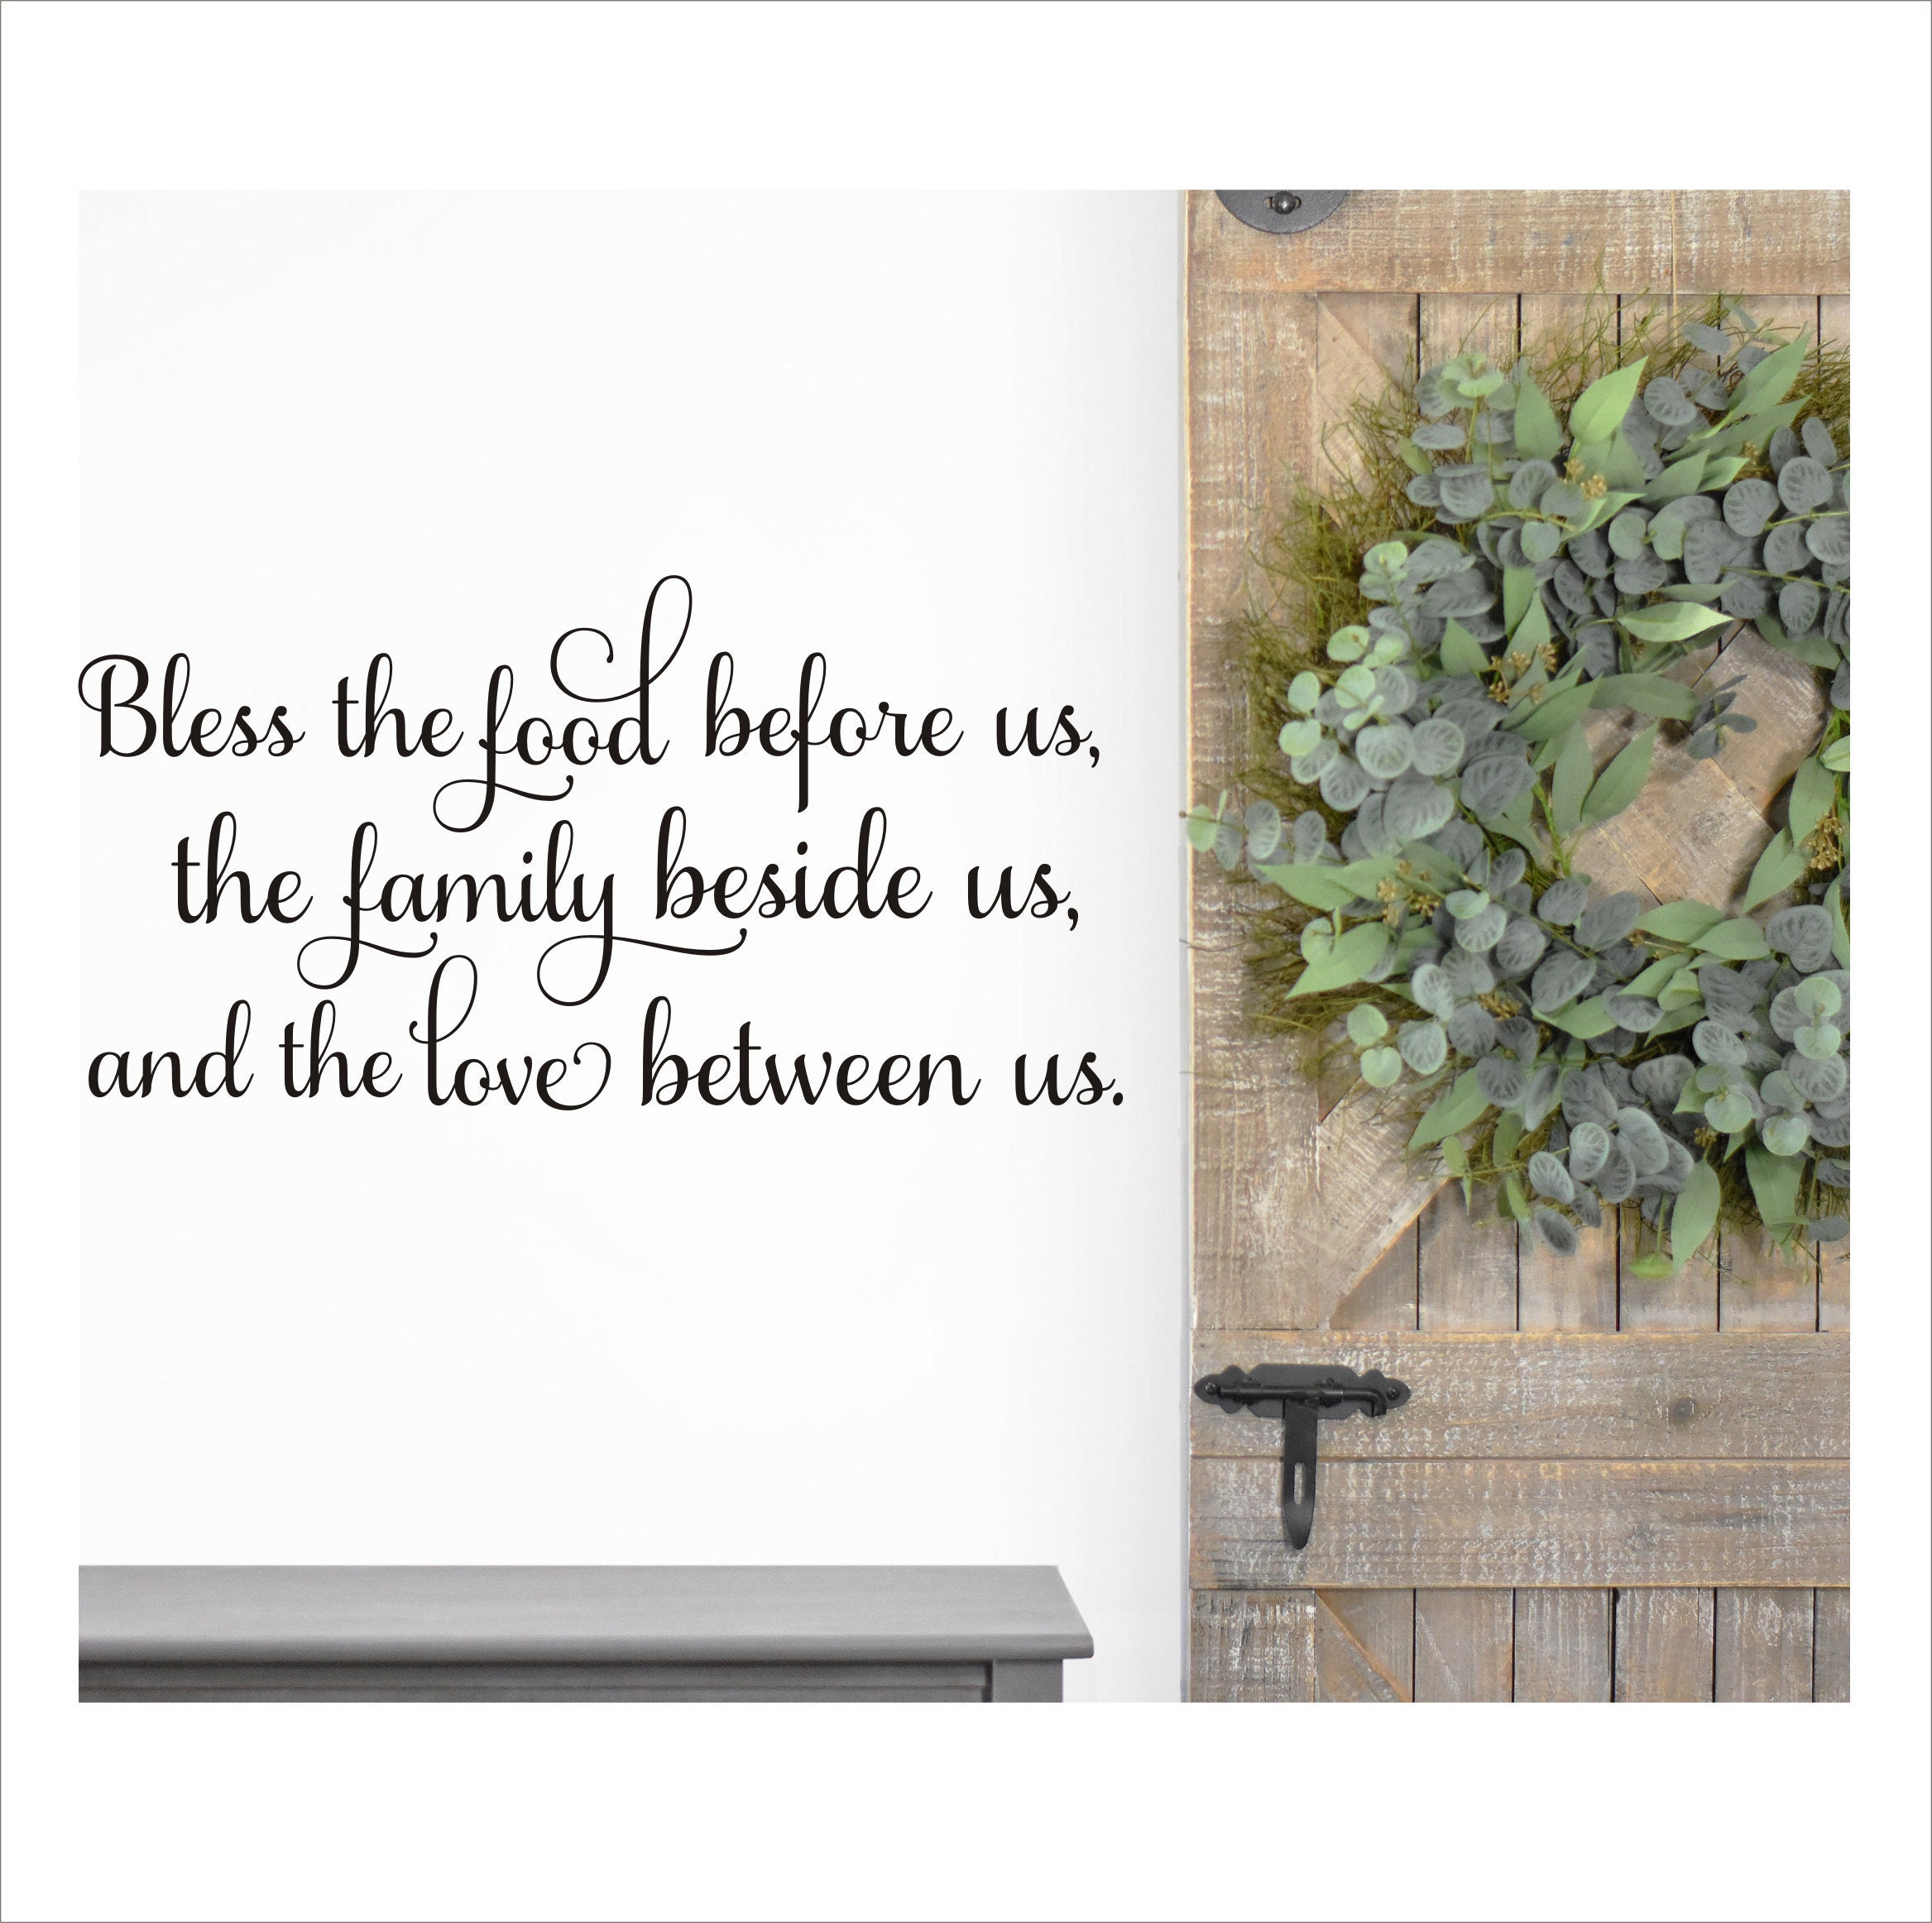 Outus Dinner Prayer Wall Decor Decal Meal Prayer Wall Decor Kitchen Prayer  Stickers Bless The Food Before Us Sign Wall Sticker Quote